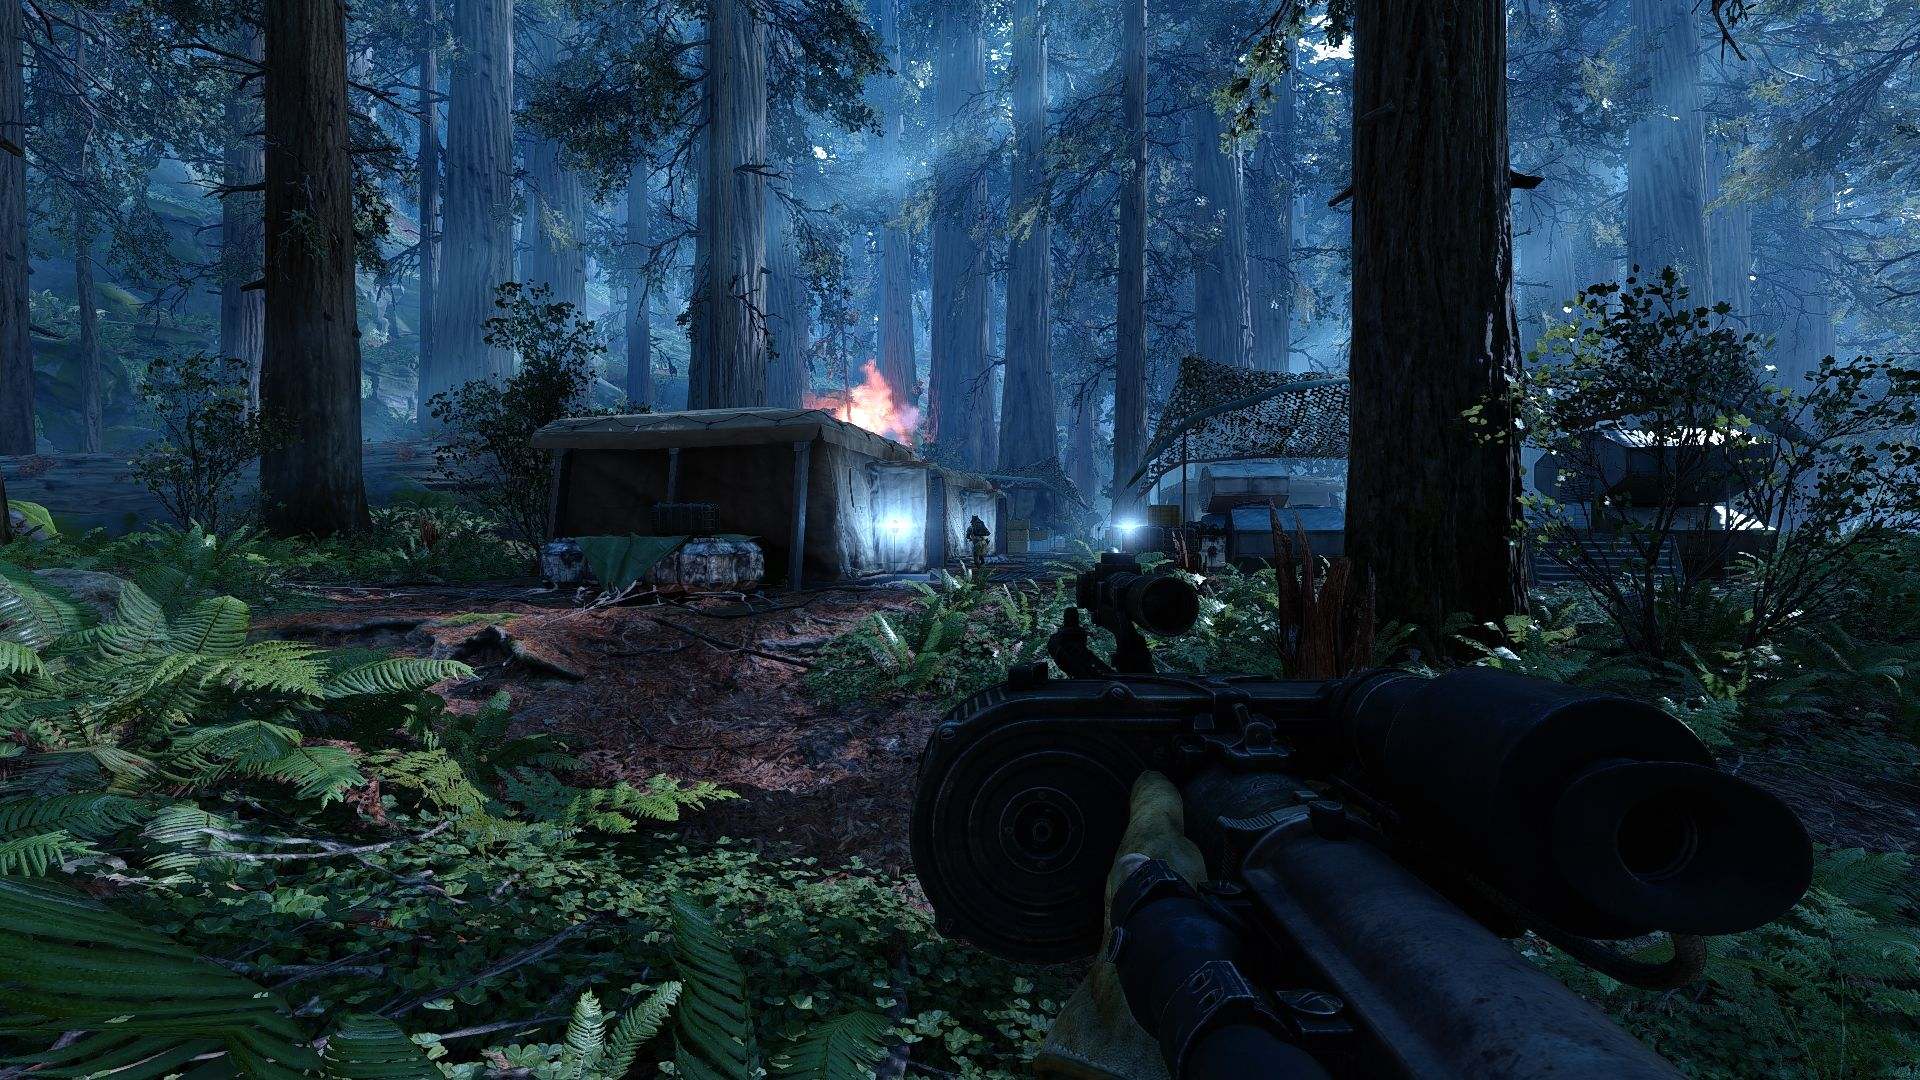 Soldier watching over multiple bunkers in foresty terrain.